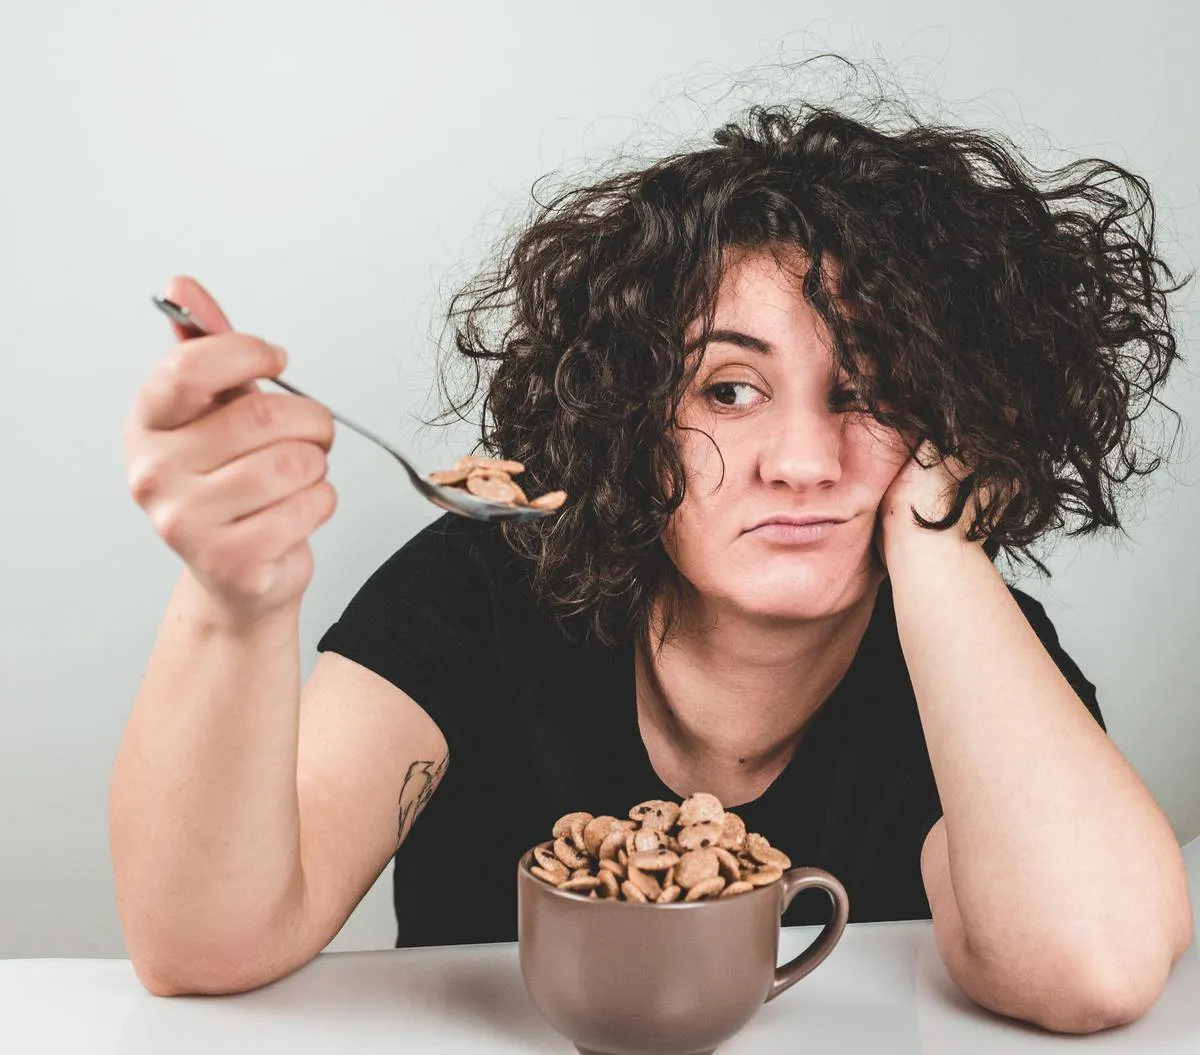 Woman looking skeptically at a spoonful of cereal.